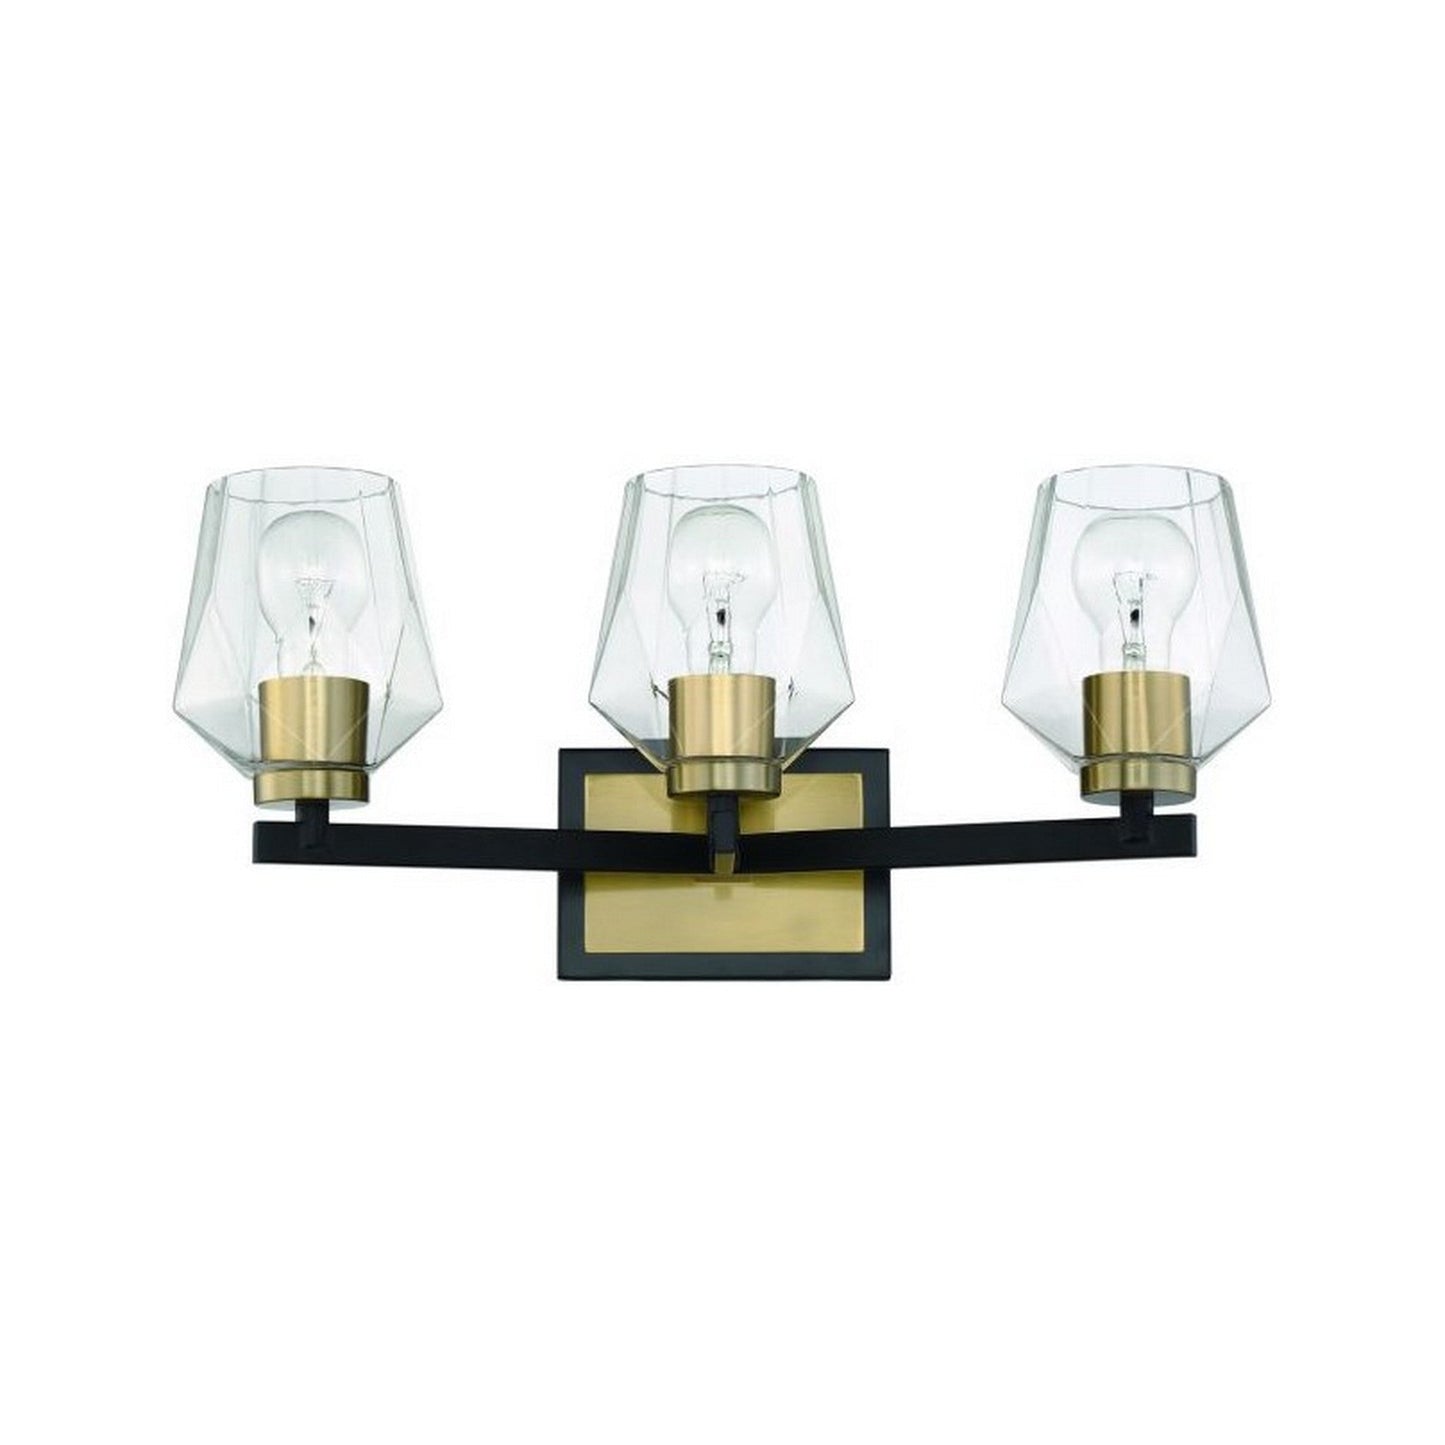 Craftmade Avante Grand 21" 3-Light Flat Black and Satin Brass Vanity Light With Clear Glass Shades